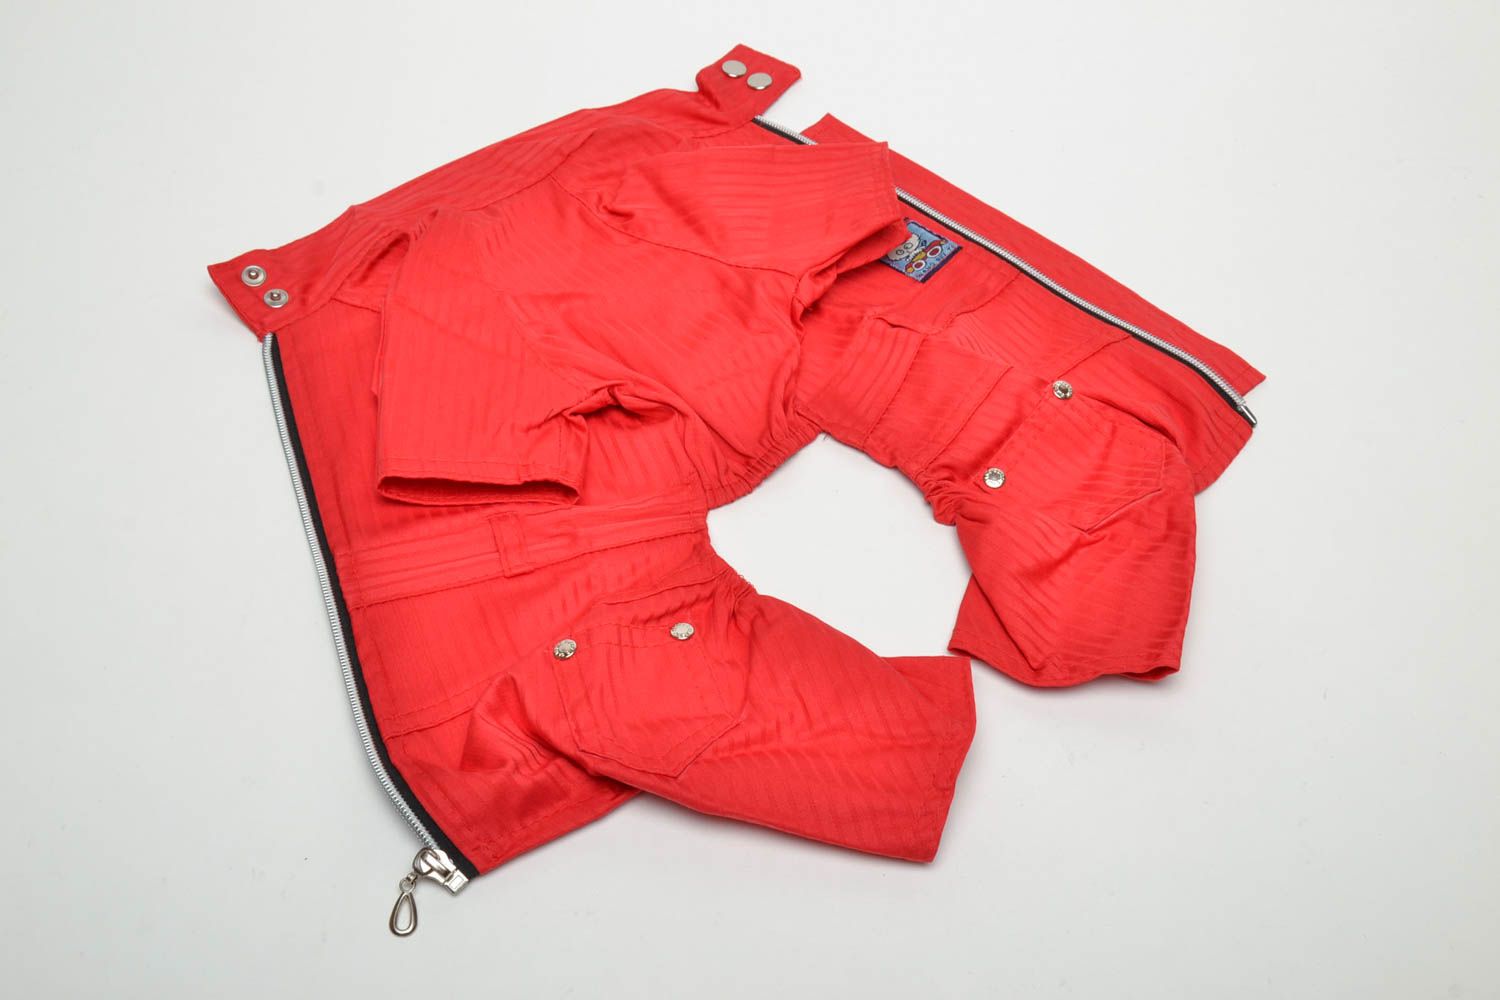 Red dog jumpsuit photo 4